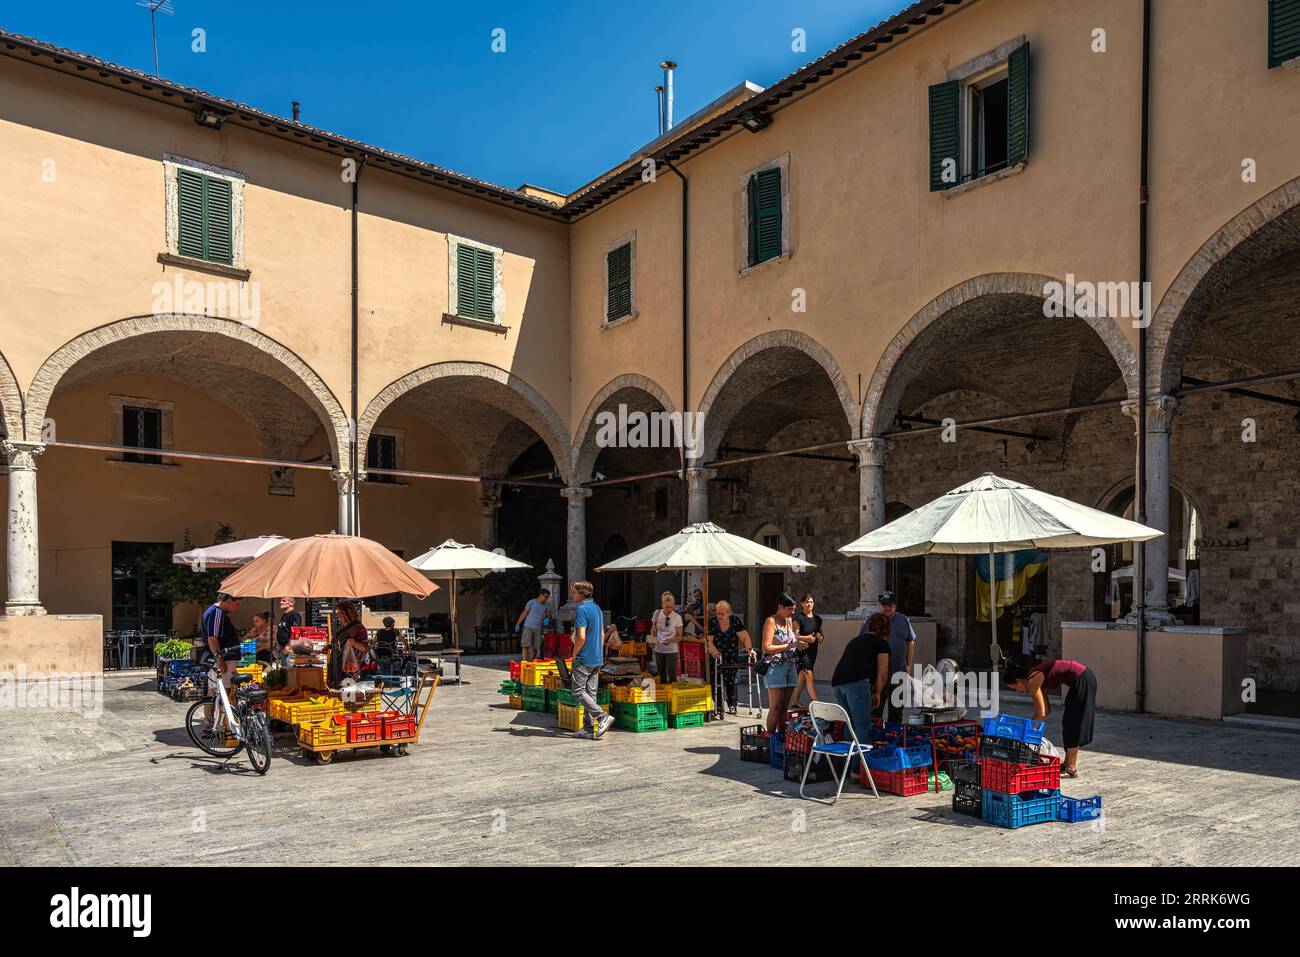 The fruit stalls at the farmers' market in the cloister of the church of San Francesco. Ascoli Piceno, Marche region, Italy, Europe Stock Photo